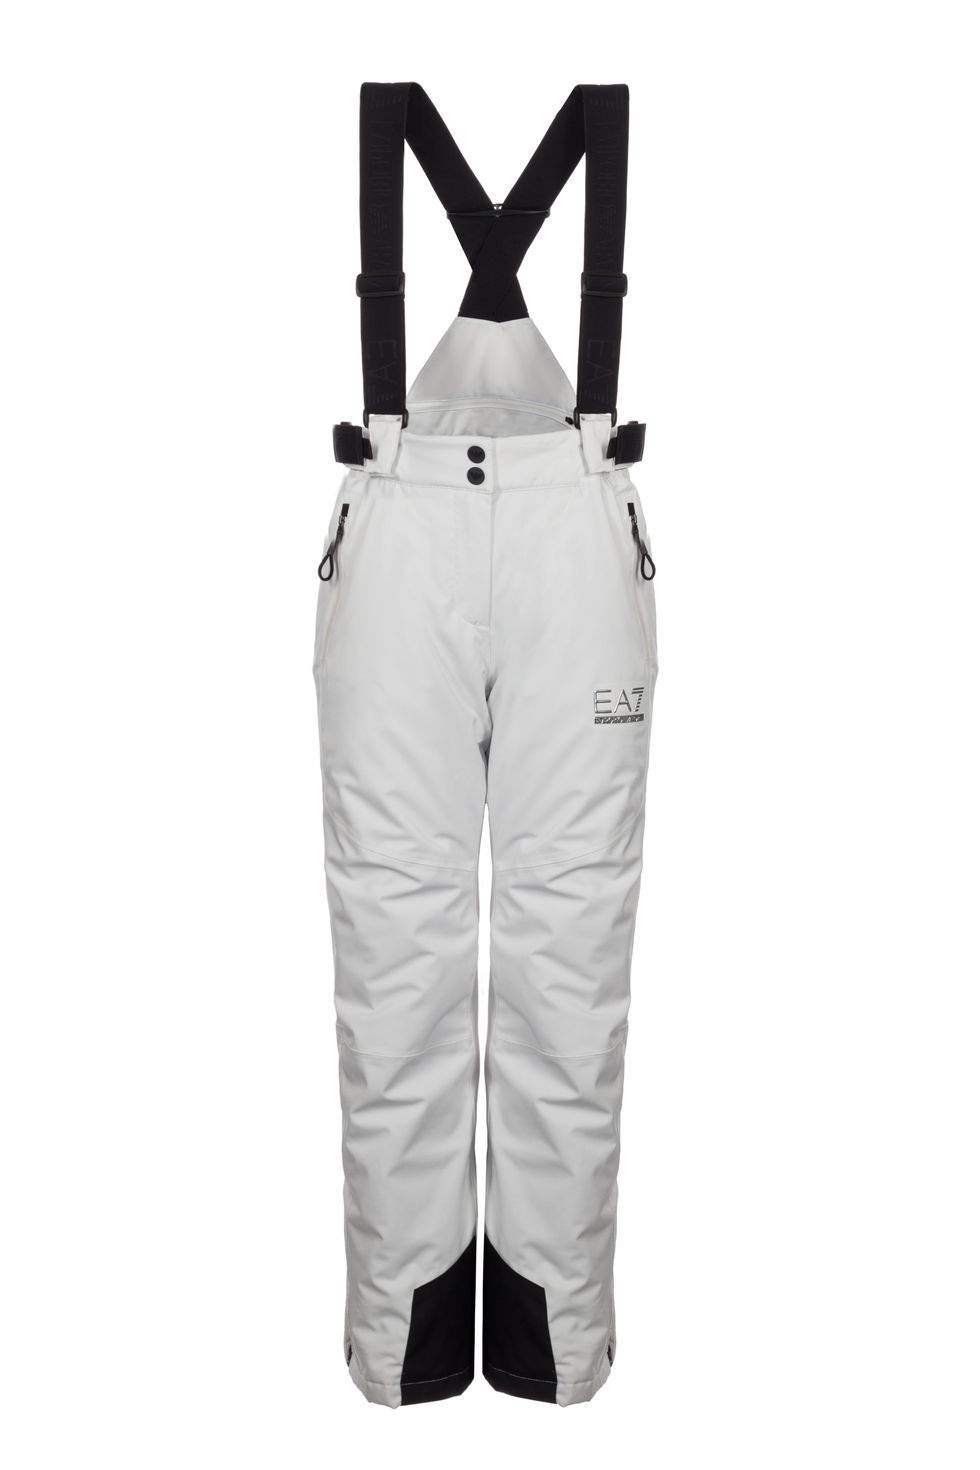 Clothing, White, Sportswear, Trousers, Overall, Outerwear, Waders, Sports gear, Jeans, 